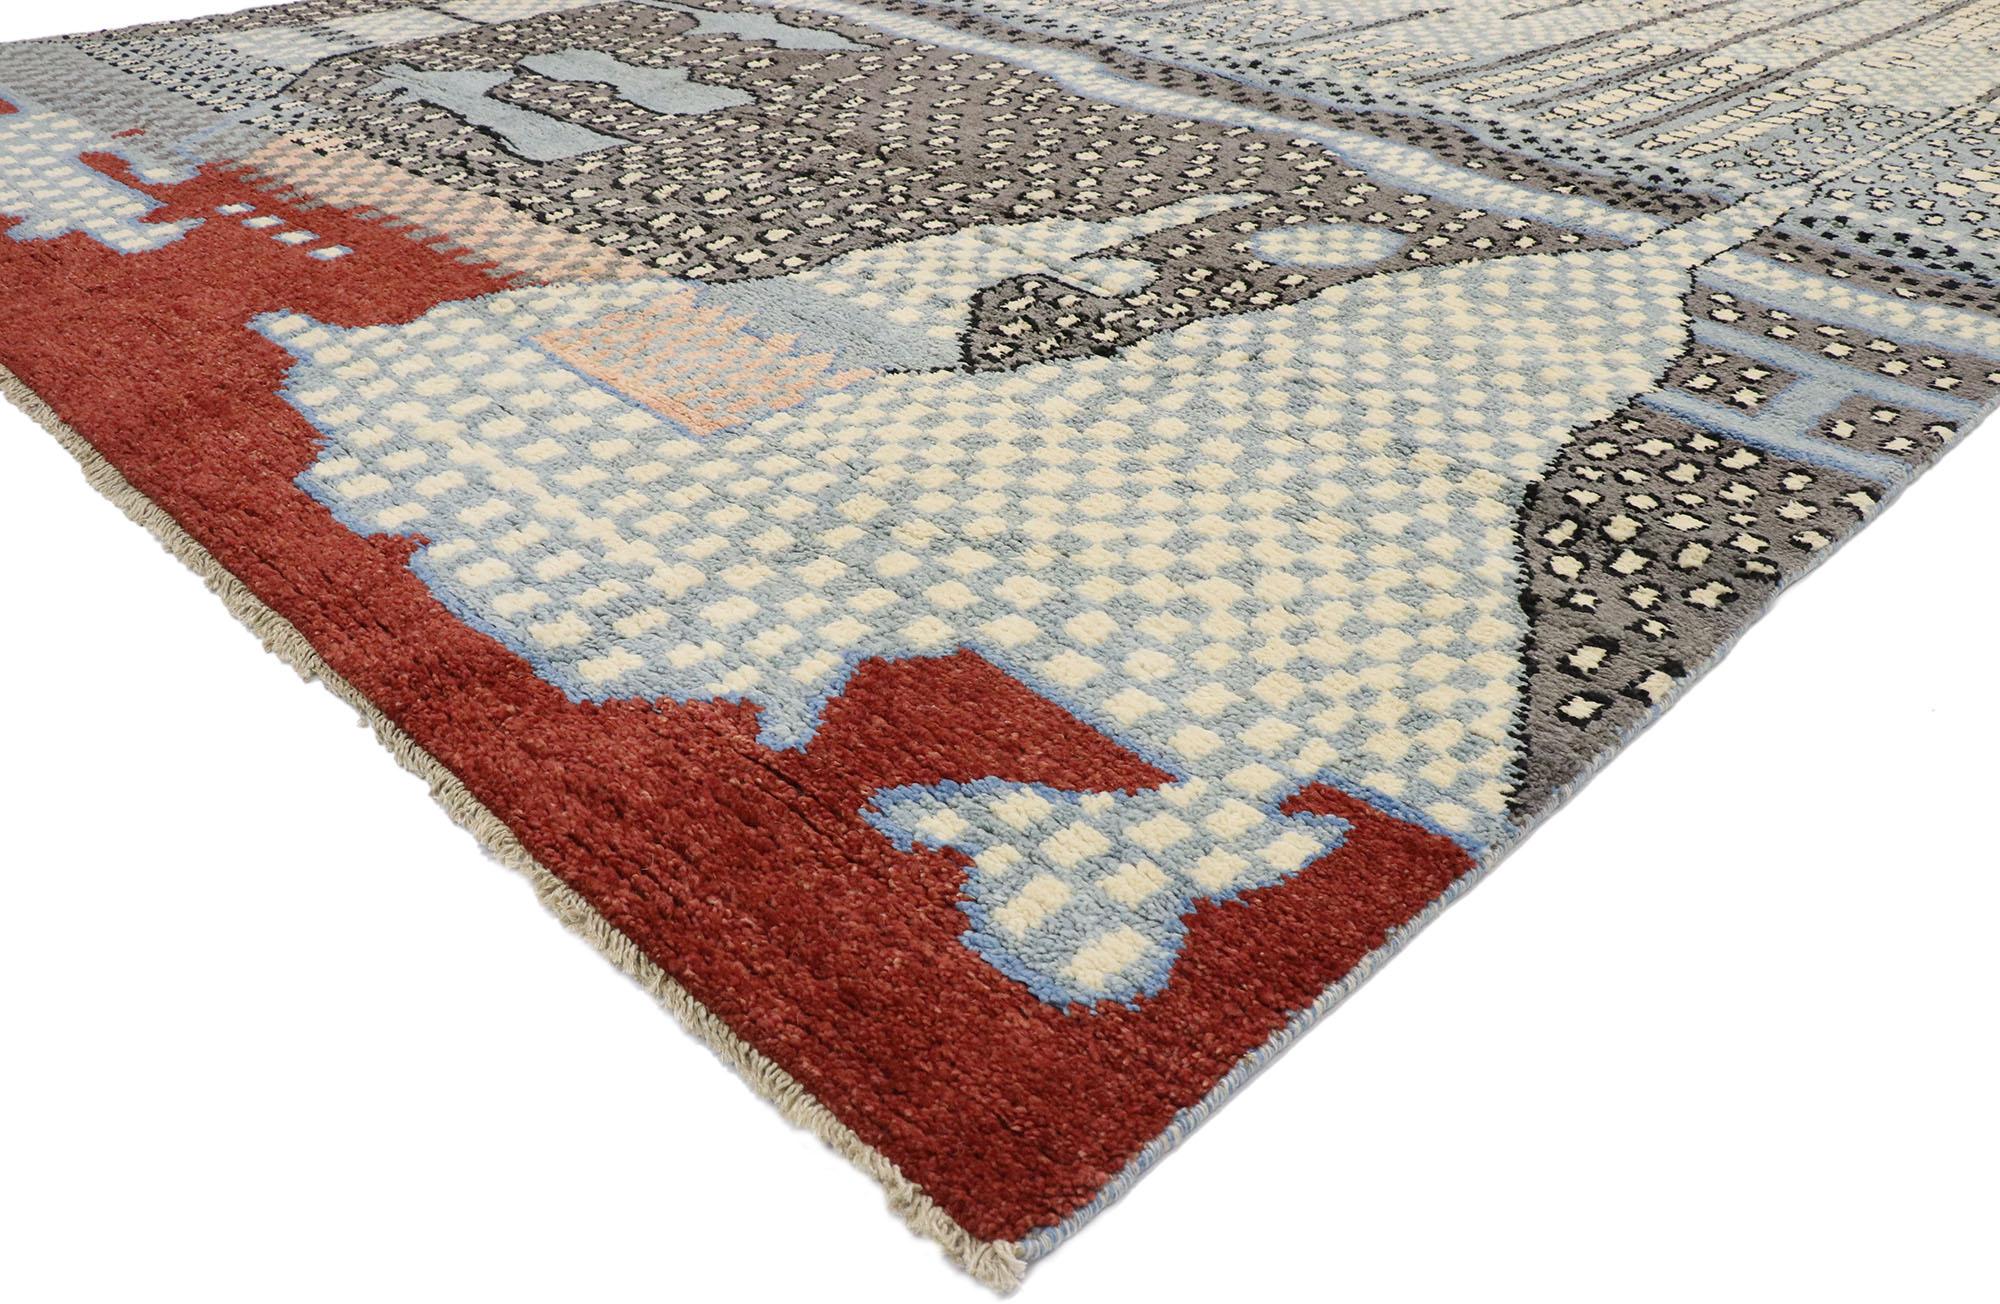 80644, new contemporary Moroccan style rug inspired by Gunta Stolzl and Jasper Johns. Showcasing a bold expressive design, incredible detail and texture, this hand knotted wool contemporary Moroccan style rug is a captivating vision of woven beauty.